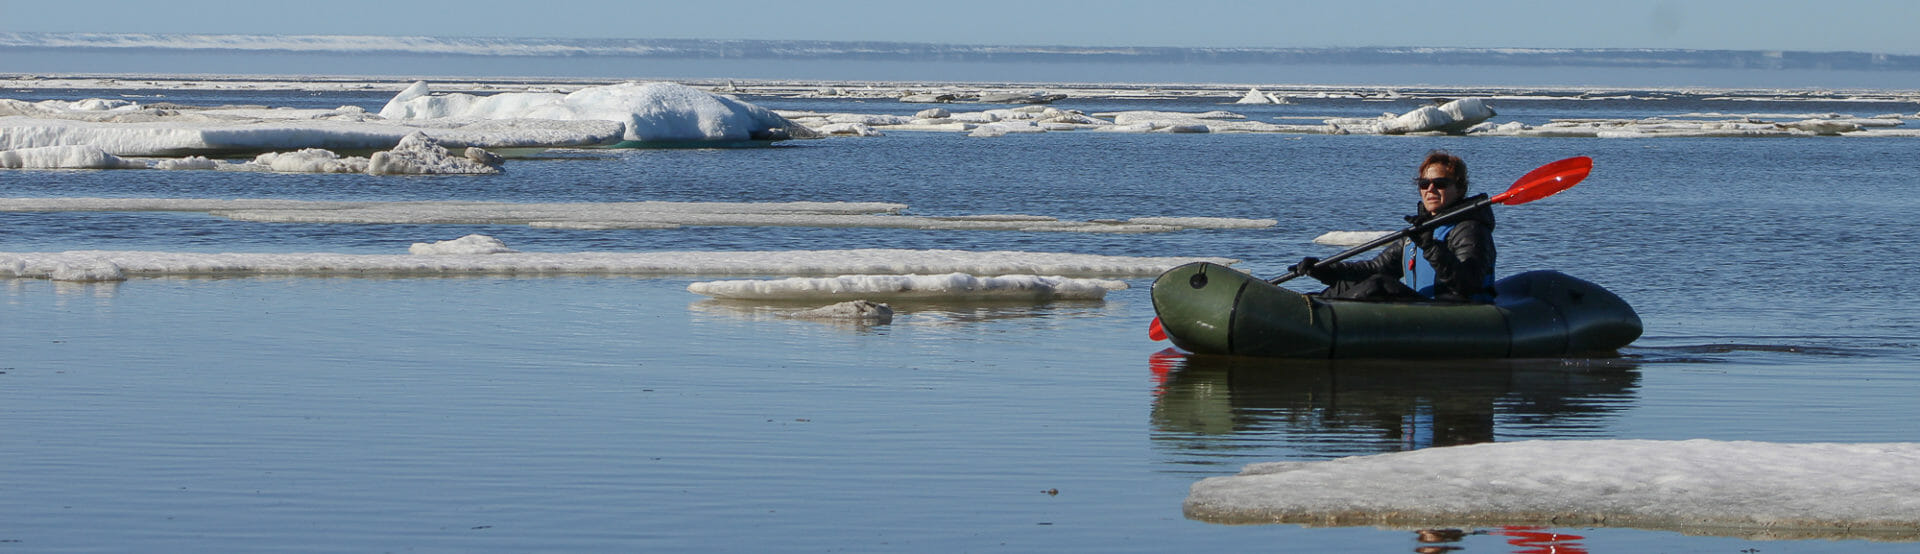 packrafting in the sea ice of the beaufort sea in arctic alaska